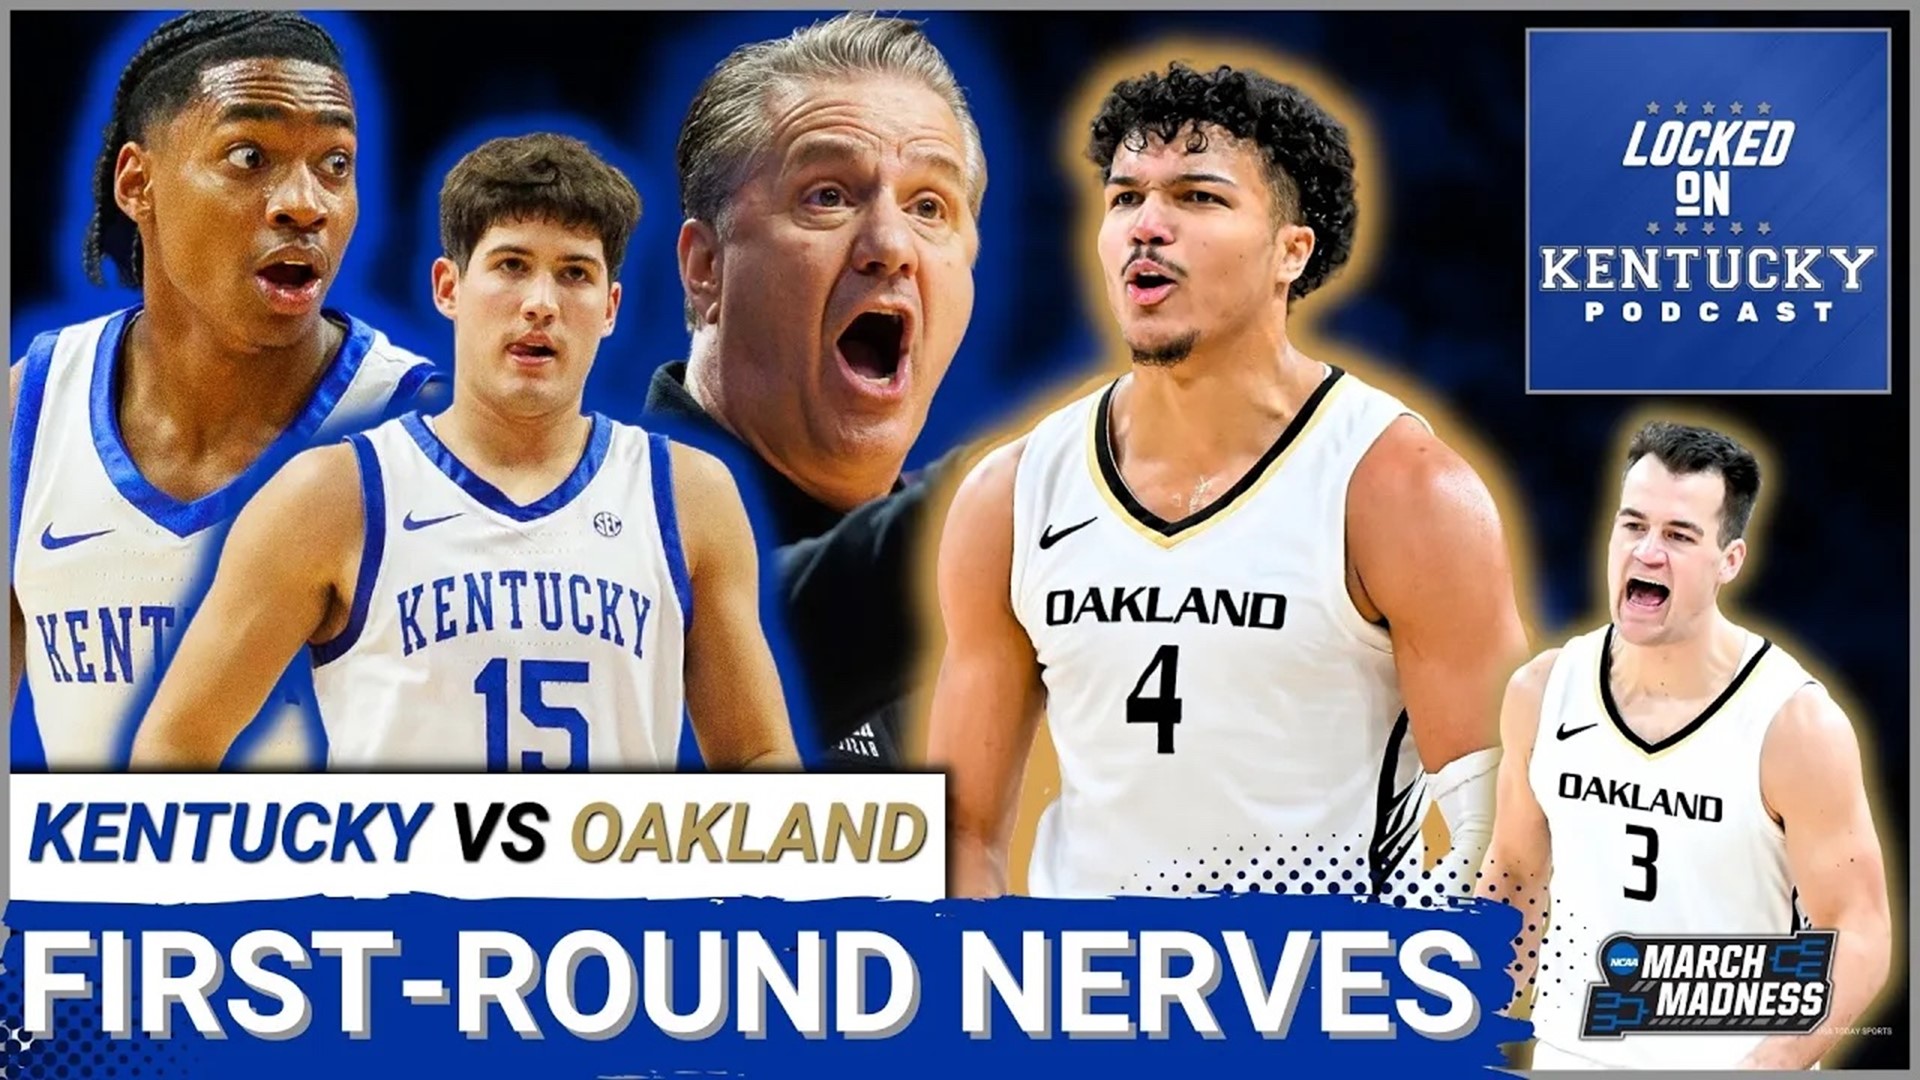 Kentucky basketball will take on the Oakland Golden Grizzlies in the NCAA tournament today. Are the Kentucky Wildcats on upset alert?